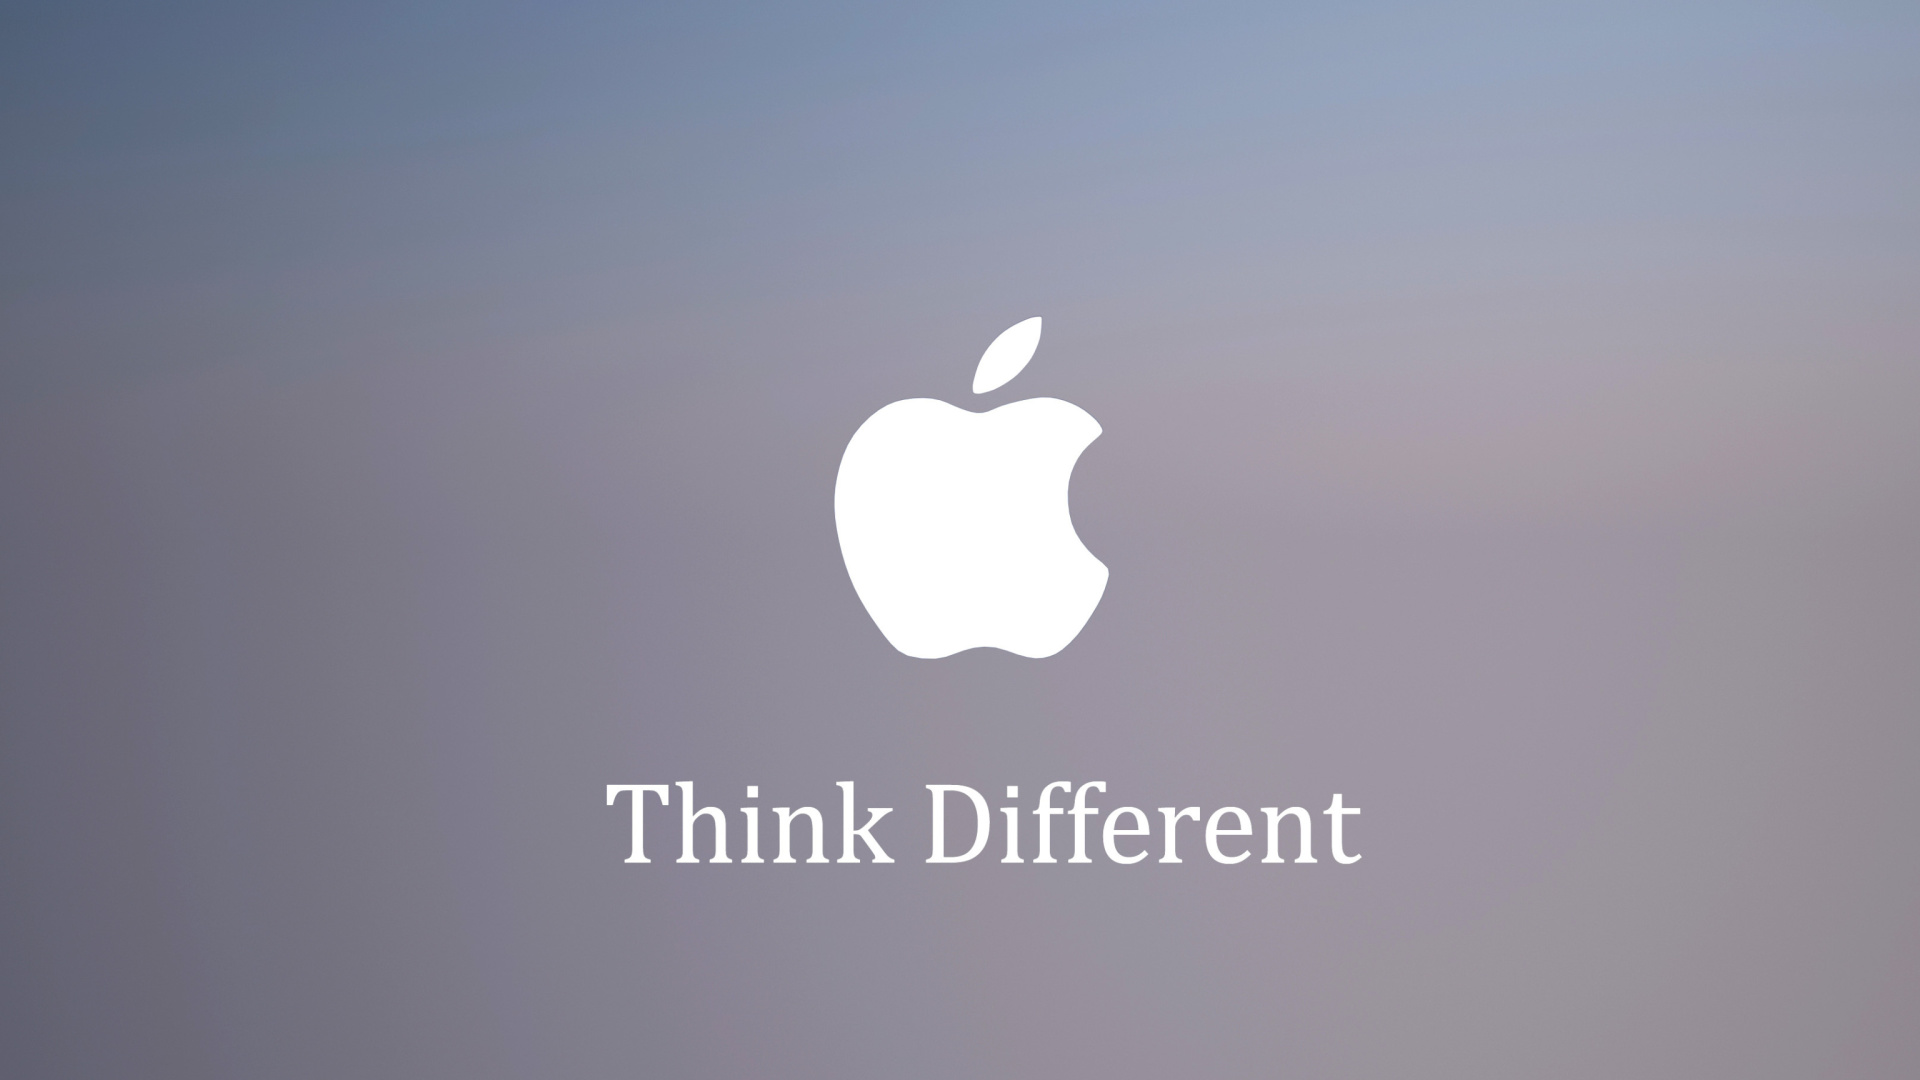 Apple, Think Different wallpaper 1920x1080